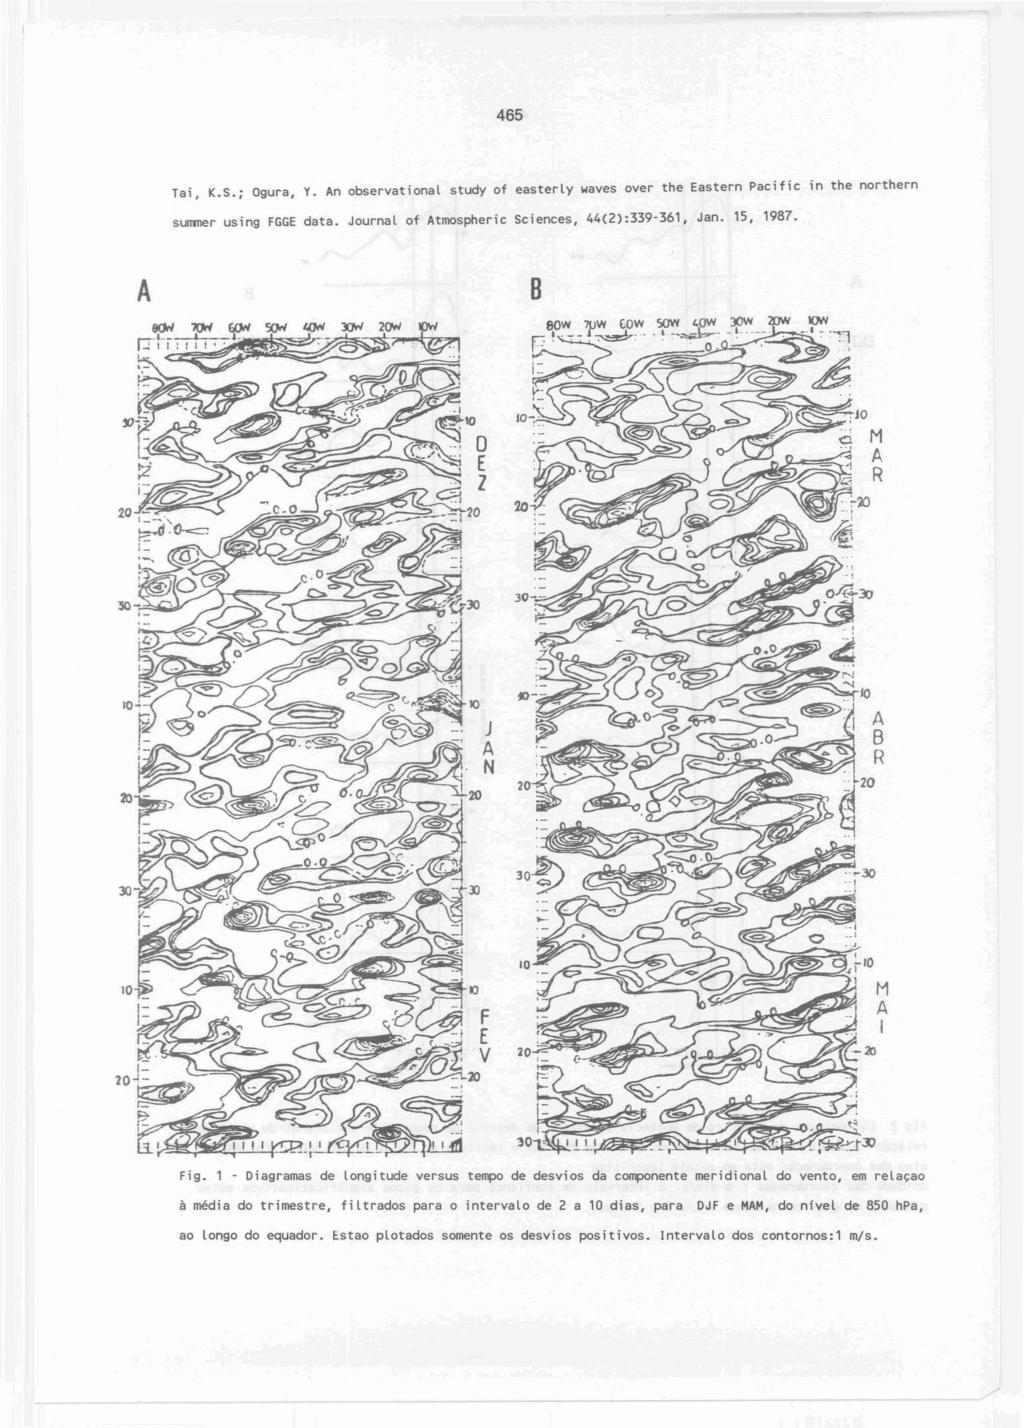 465 Tai, K.S.; Ogura, Y. An observational study of easterly waves over the Eastern Pacific in the northern summer using FGGE data. Journal of Atmospheric Sciences, 44(2):339-361, Jan. 15, 1987.